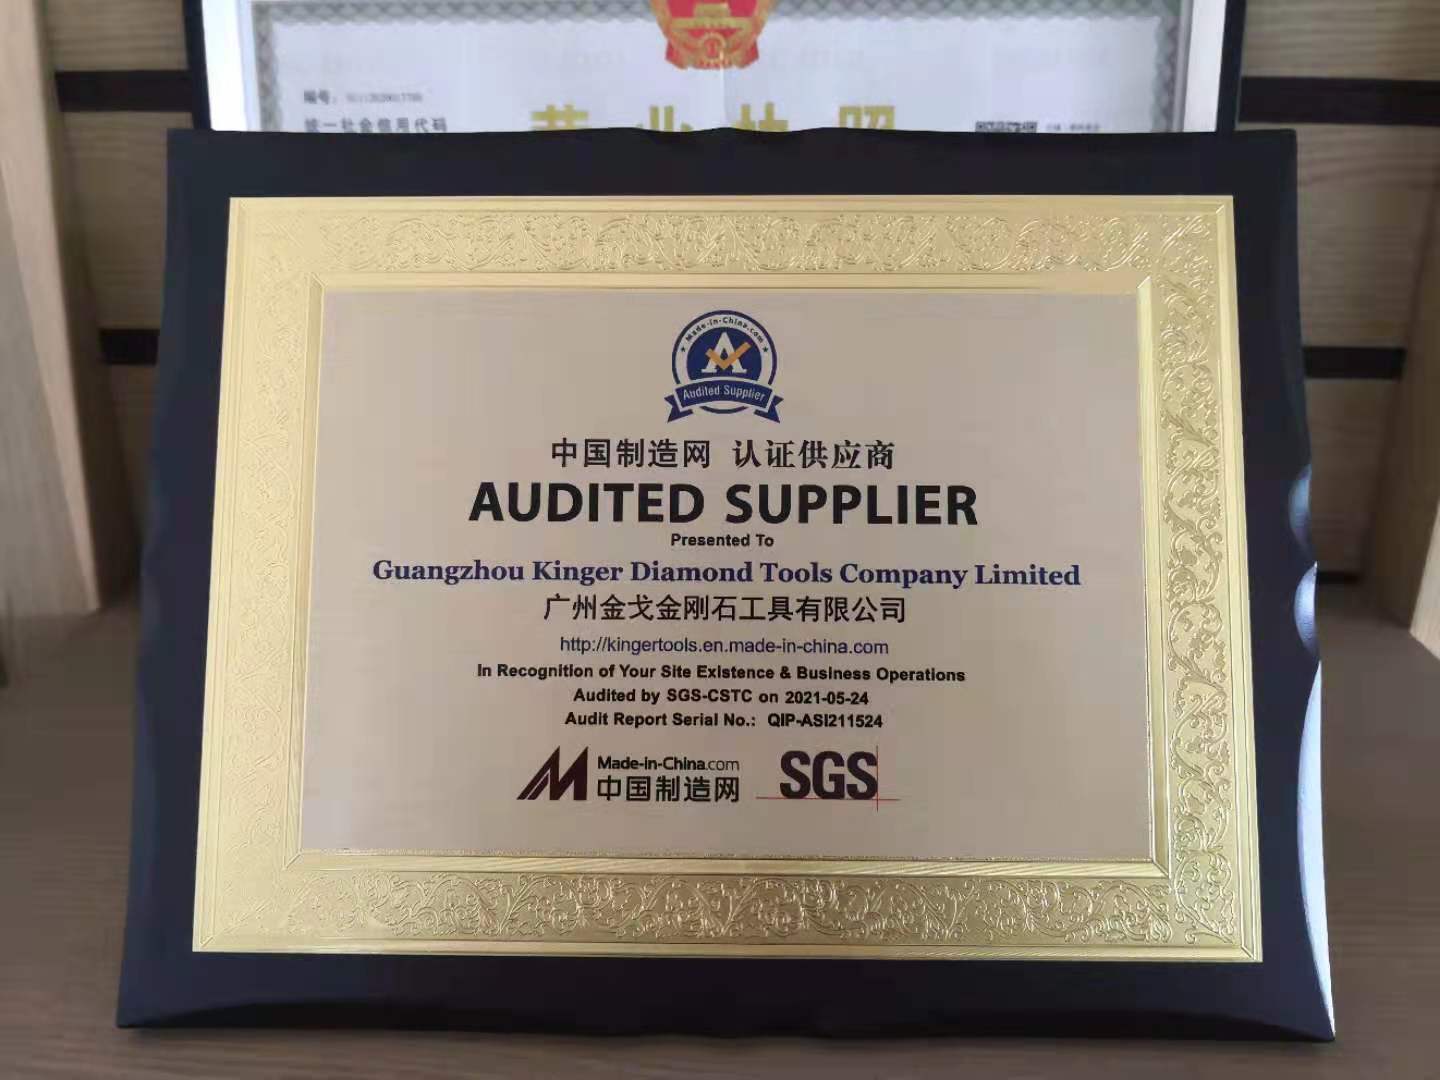 we are an audited supplier